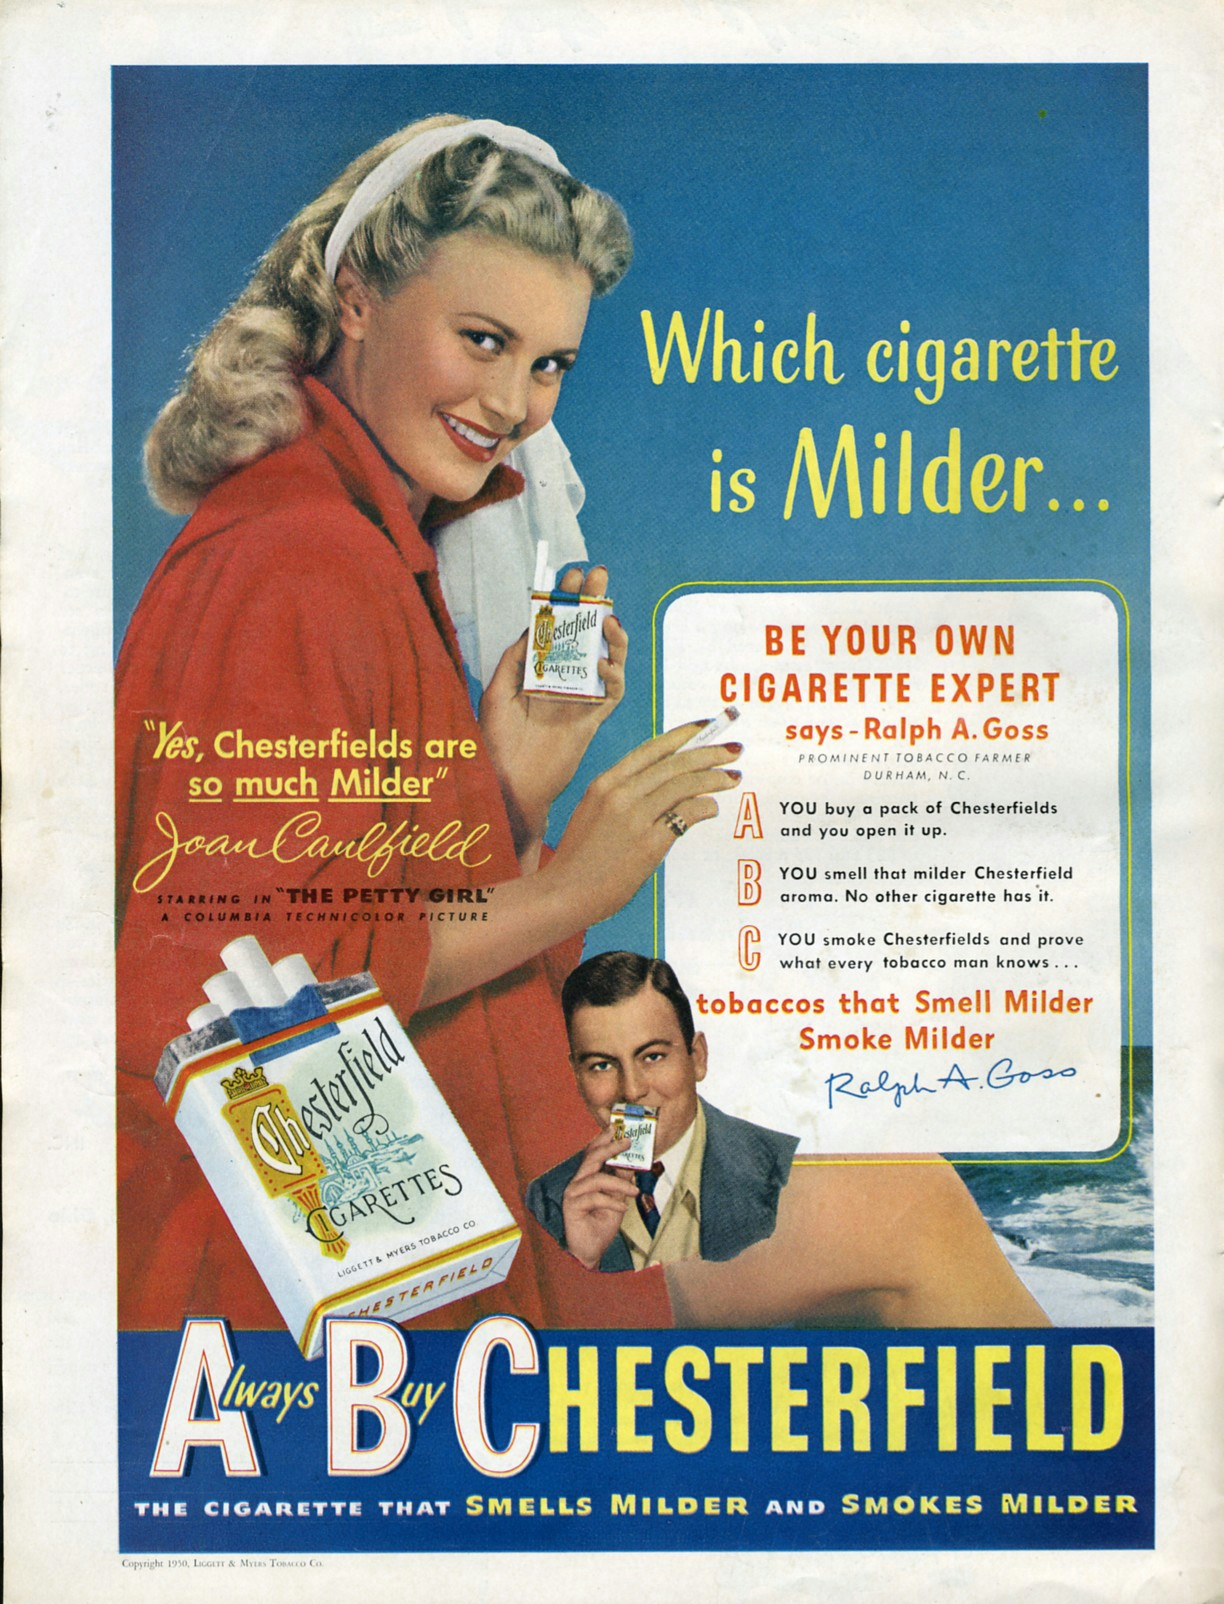 An advert for Chesterfield Cigarettes featuring a colour illustration of the actor Joan Caulfield. She's wearing a loose red dress and is set against a blue ocean background. She is holding a packet of Chesterfields in one hand and a lit cigarette in the other. She is smiling. There's a text box on the right side of the poster, with a small portrait of a man beside it. The text says, "Be your own cigarette expert says Ralph A Goss". A slogan in large letters across the bottom of the poster says, "Always Buy Chesterfield".